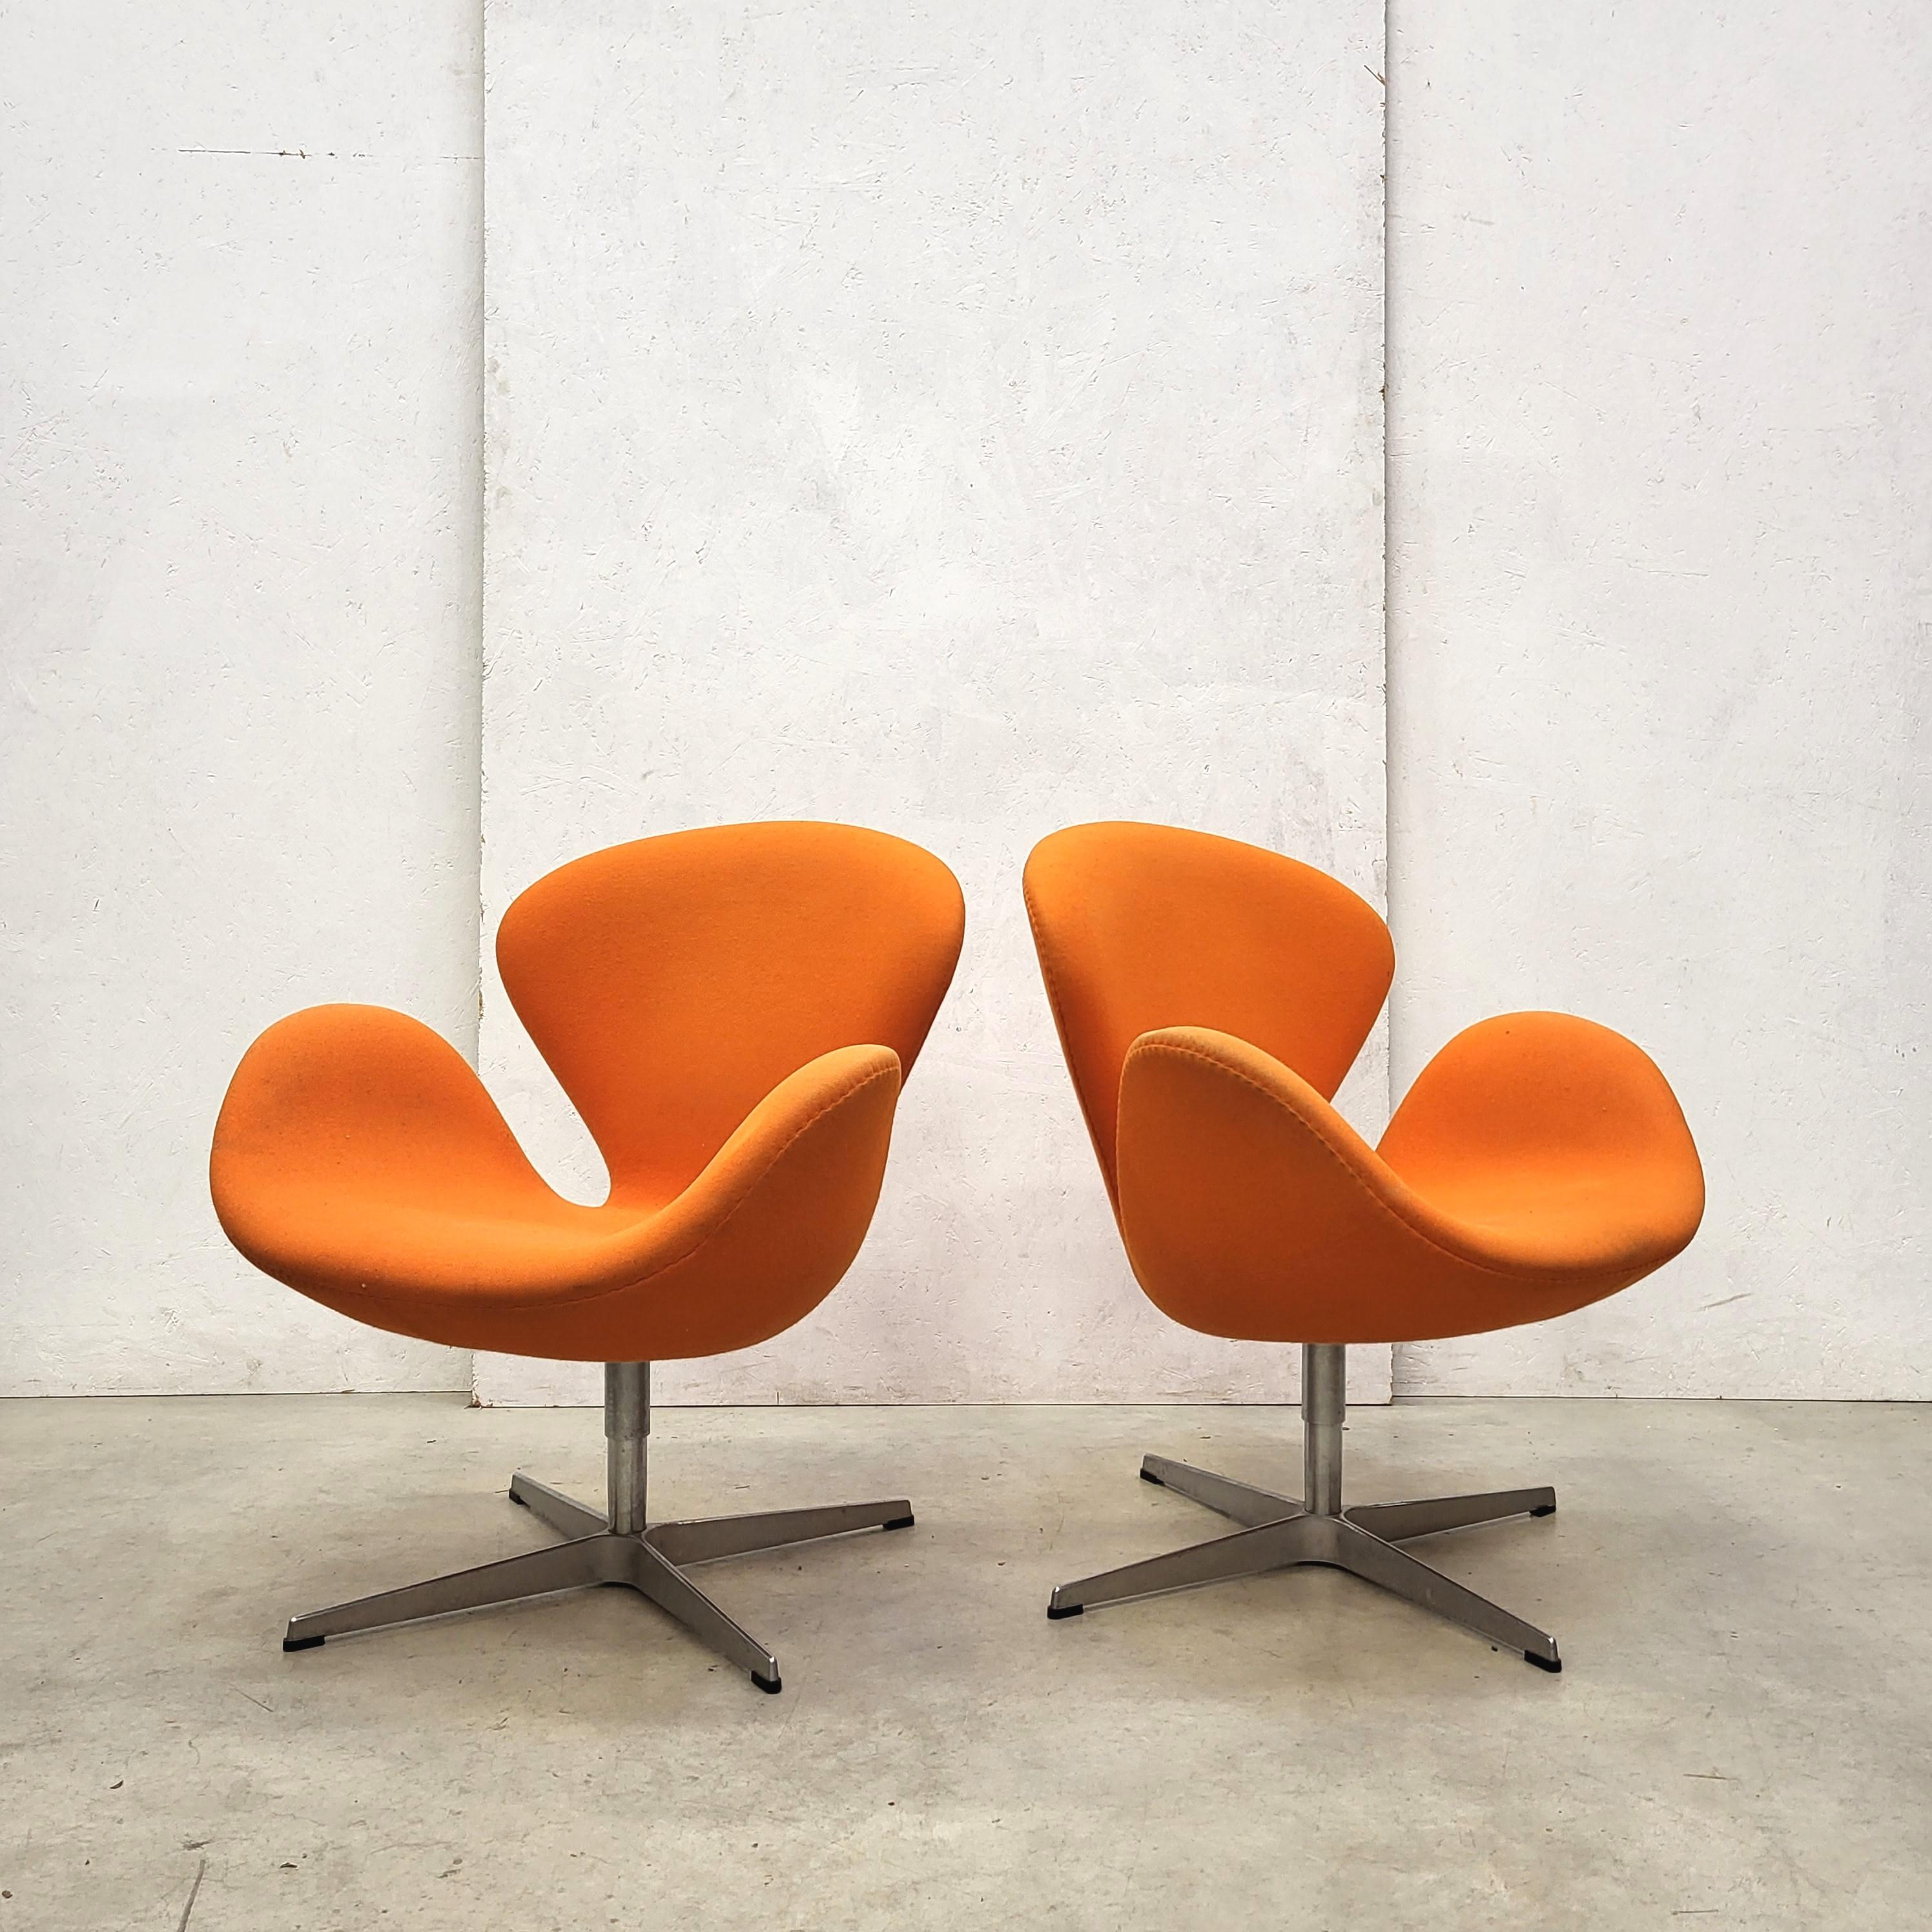 These Swan chairs were designed in the 1950s by Arne Jacobsen for the SAS Hotel in Copenhagen and produced by Fritz Hansen in 2006. 

The chair features a wonderful orange fabric upholstery. 
The pieces coming with the original Fritz Hansen label